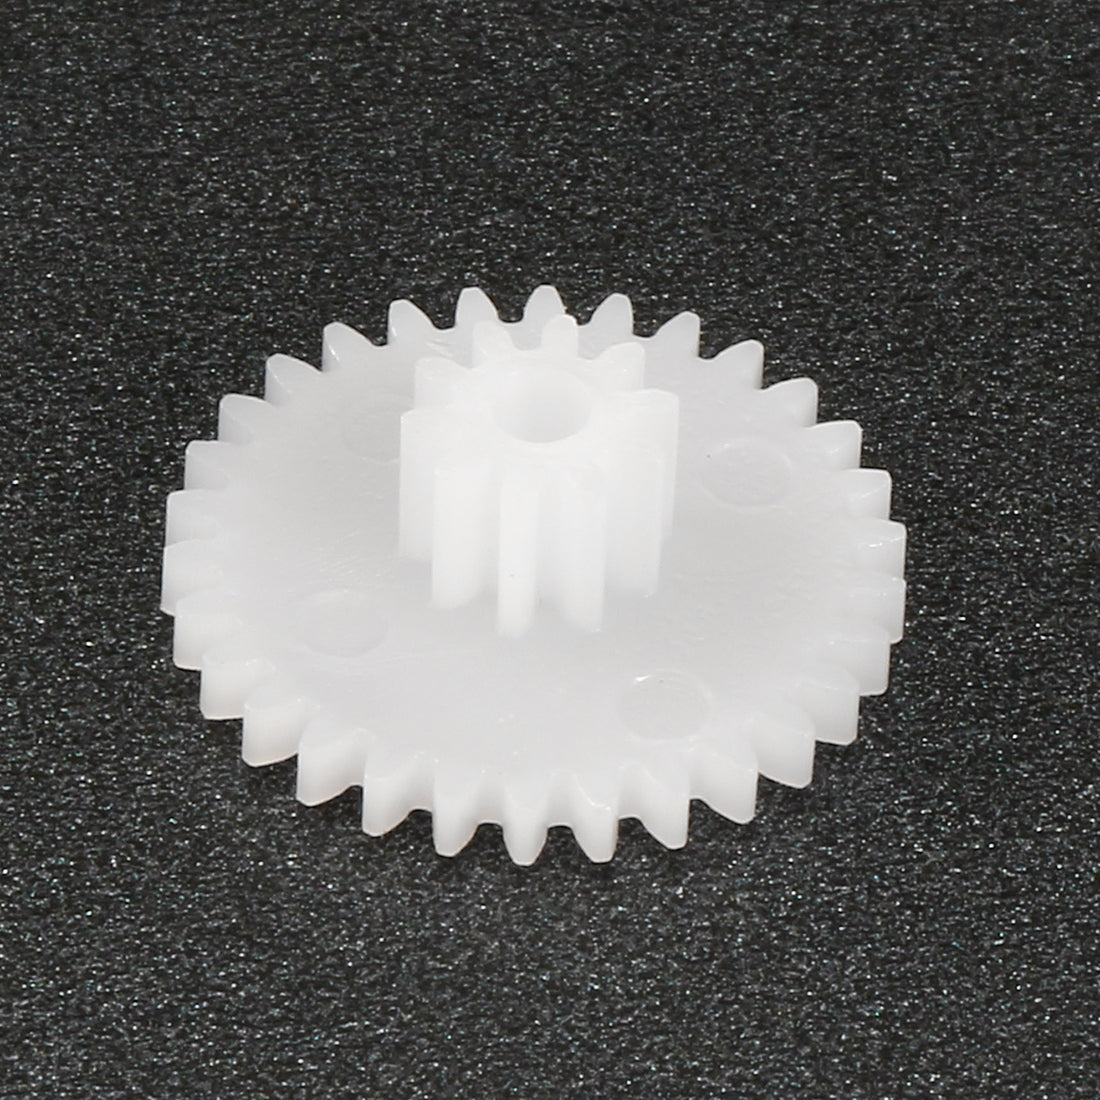 uxcell Uxcell 20Pcs 24102B Plastic Gear Accessories with 24 Teeth for DIY Car Robot Motor